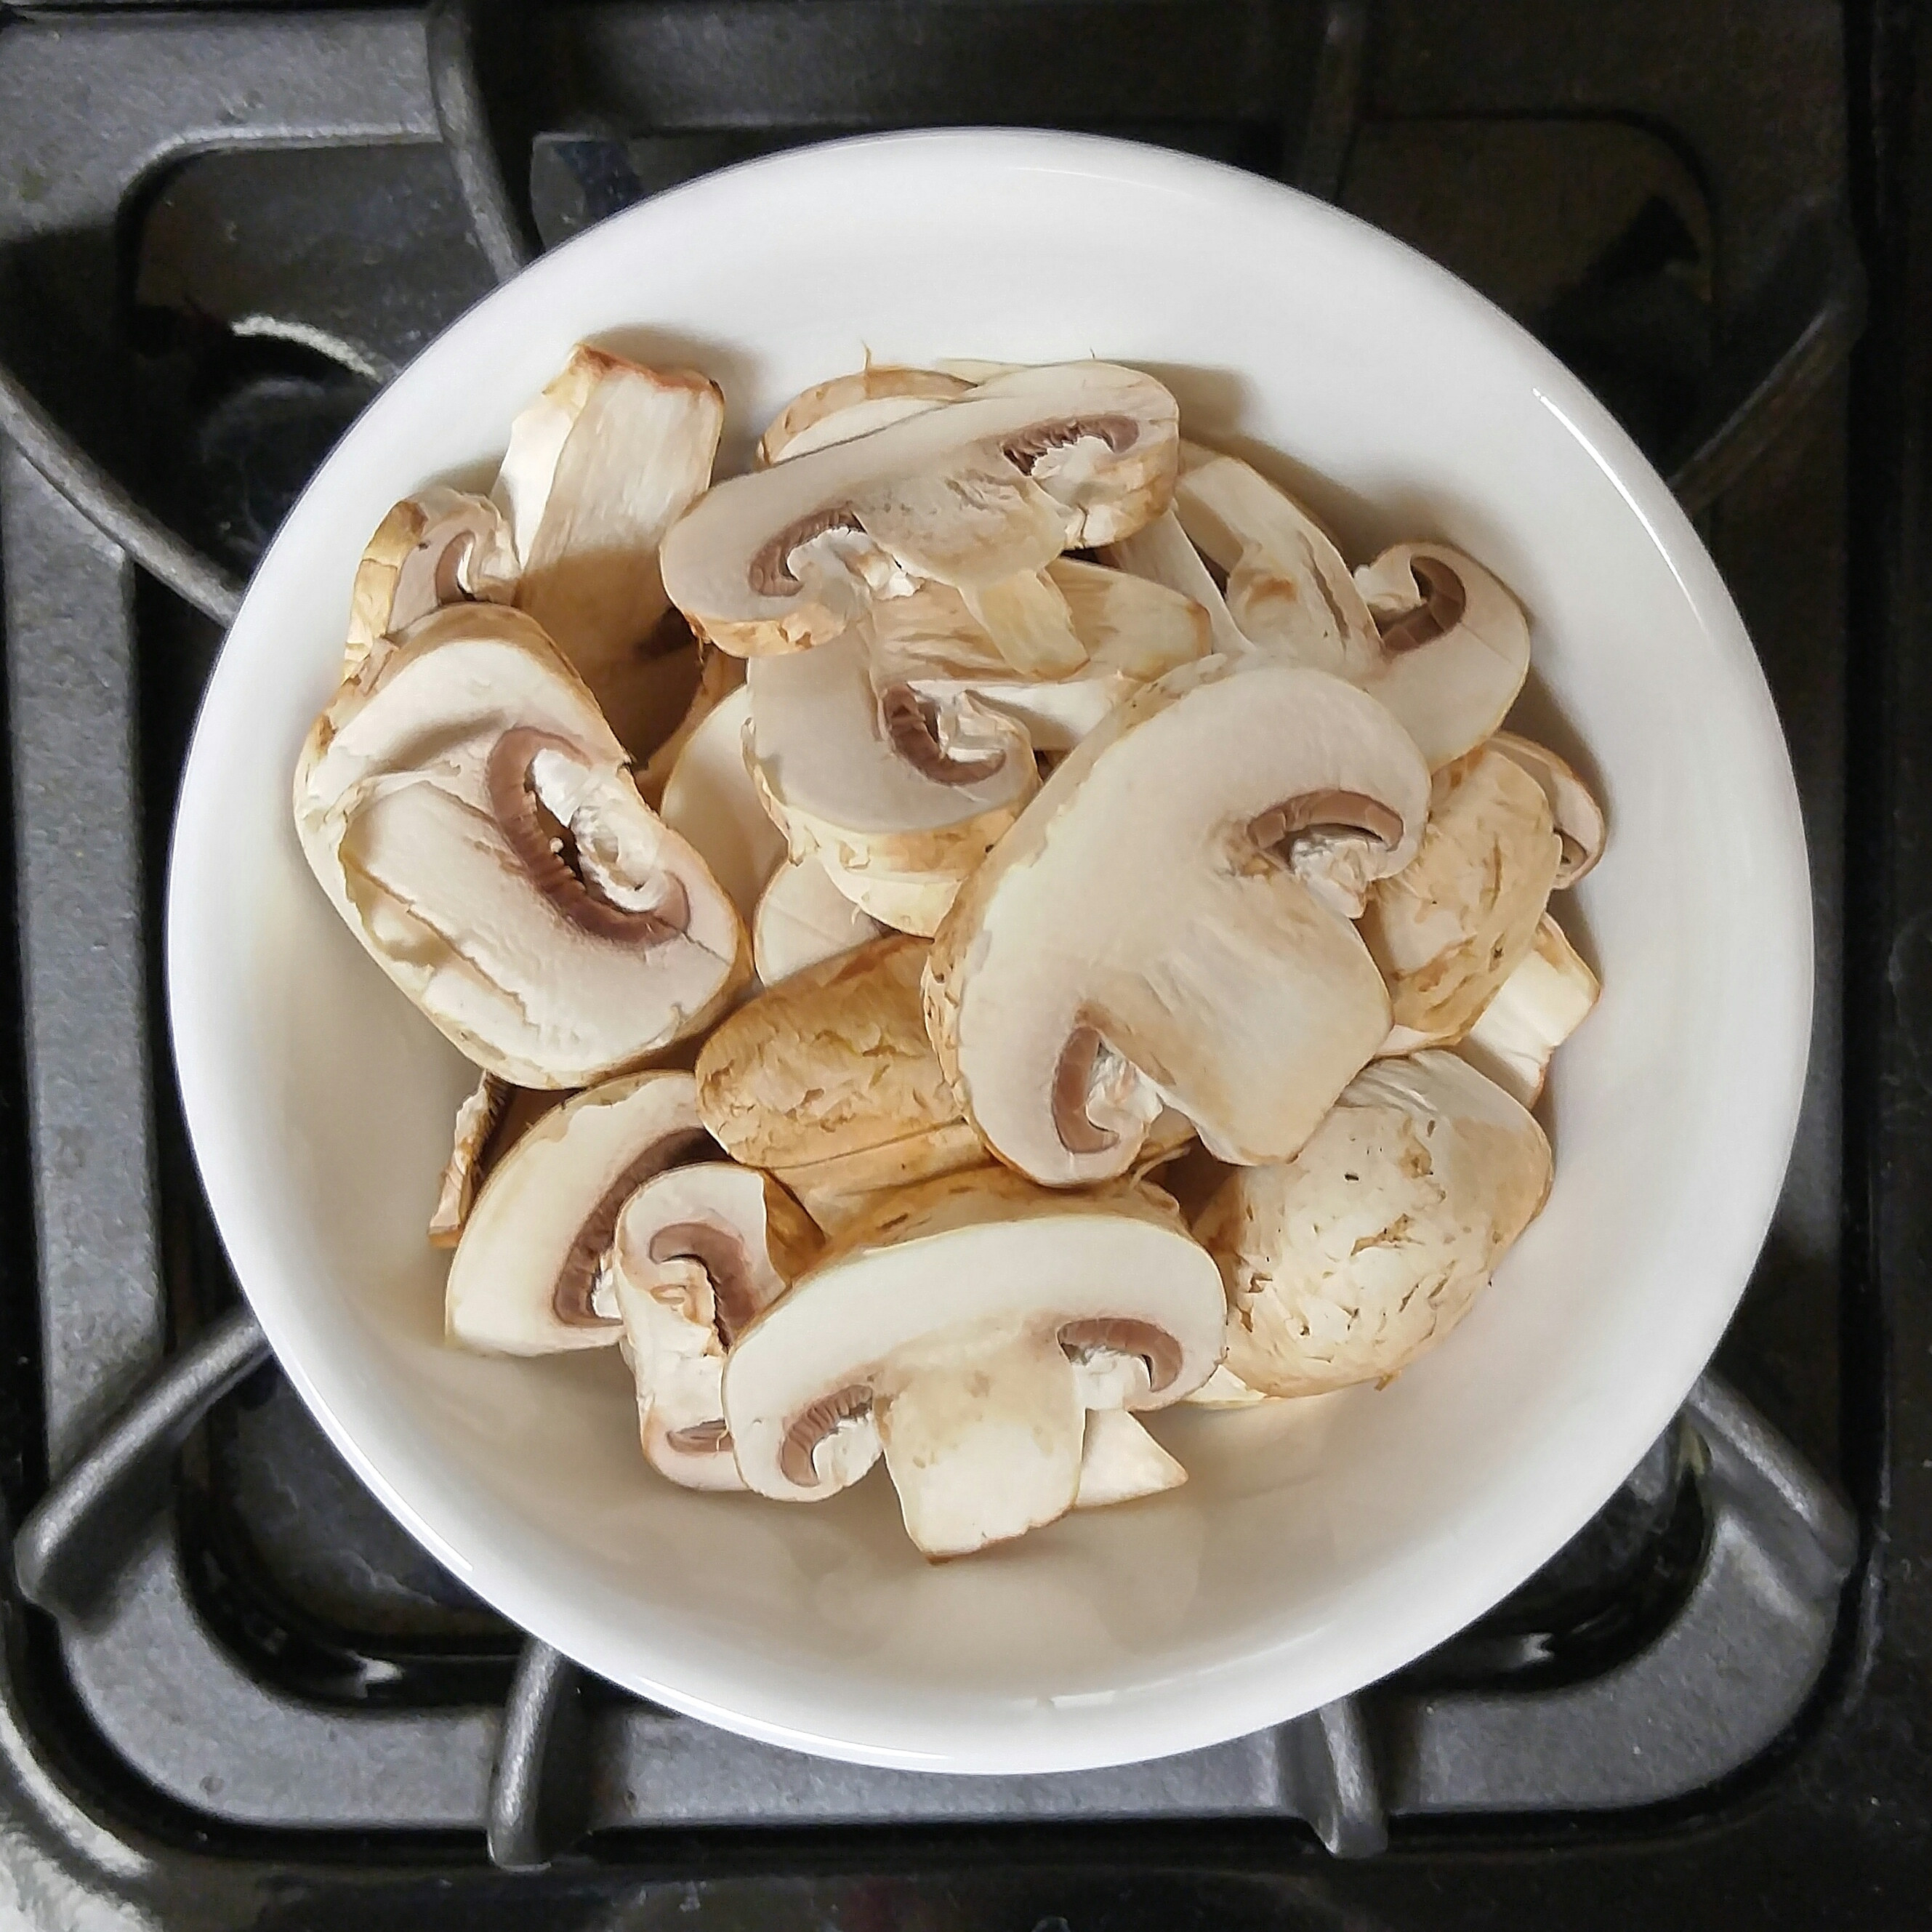 Sliced white mushrooms on a plate